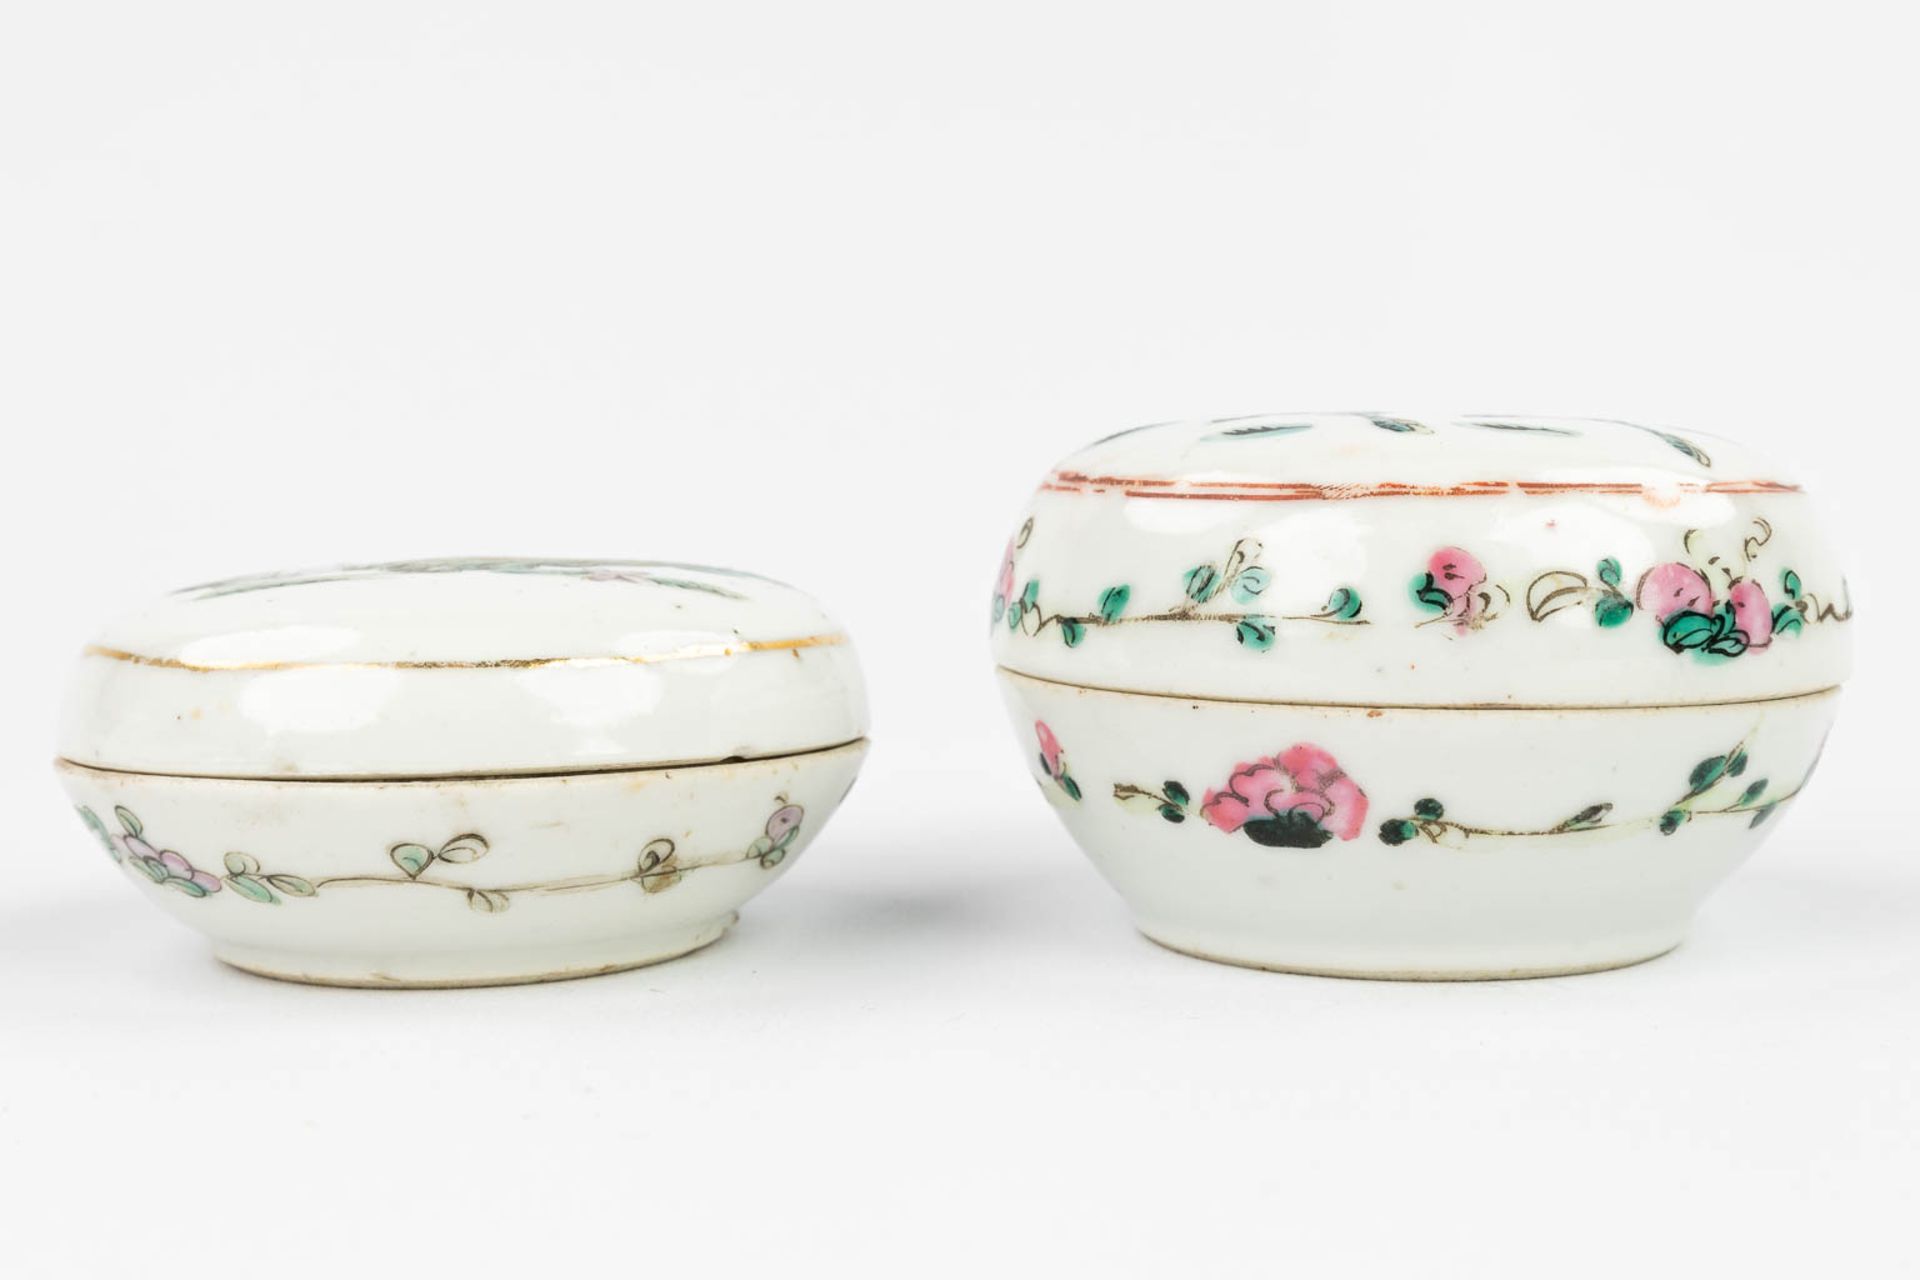 AÊset of 2 Chinese pots with lid, with hand-painted decor and made of porcelain (5 x 8,5 cm) - Image 12 of 18